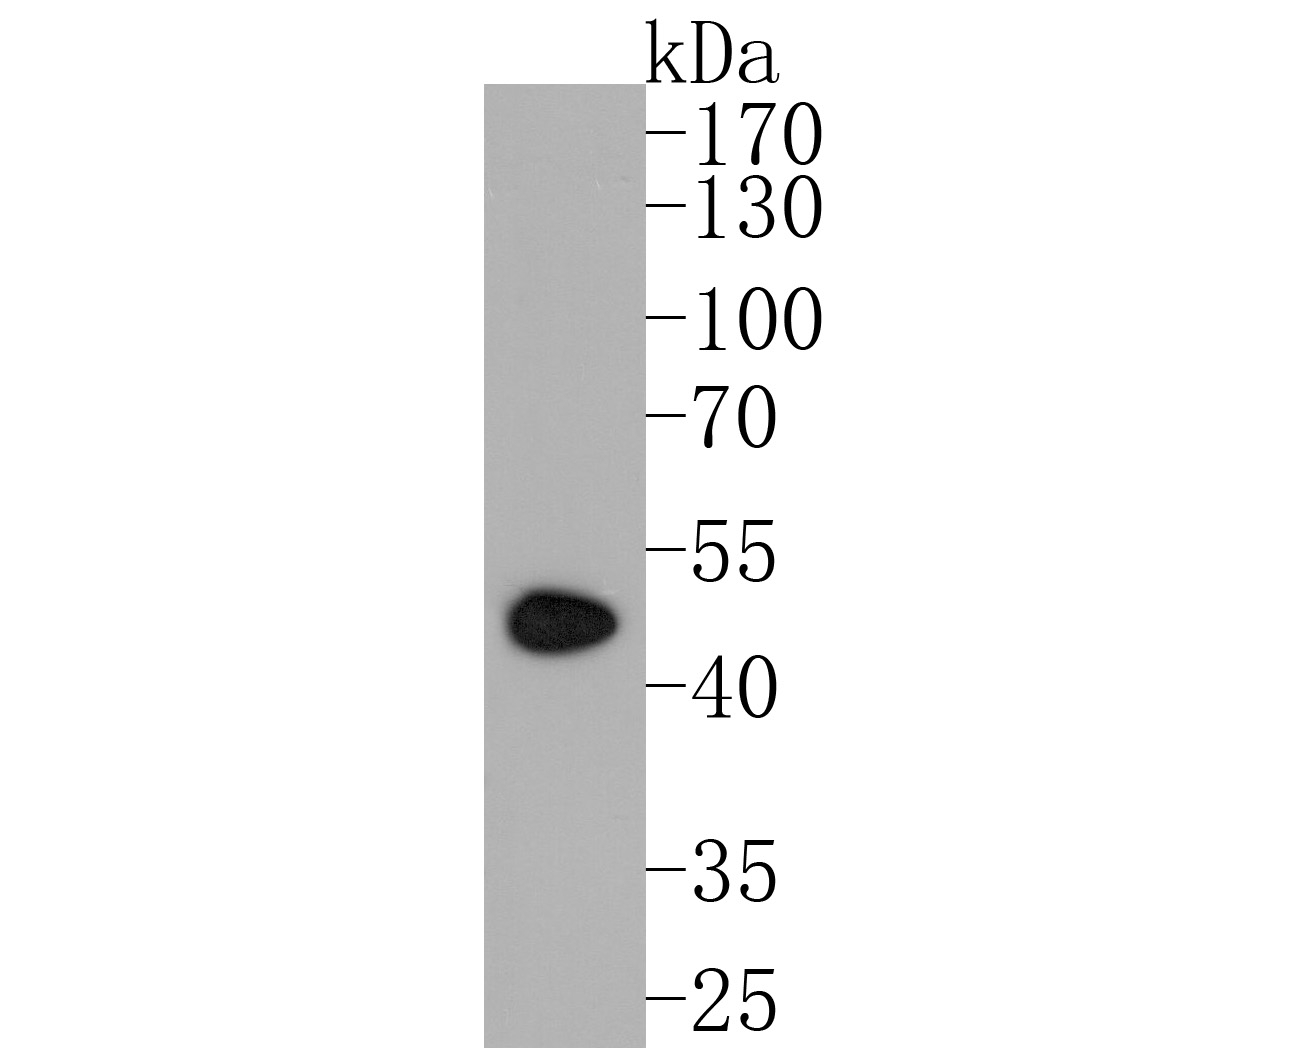 Western blot analysis of PDK2 on rat heart tissue lysates. Proteins were transferred to a PVDF membrane and blocked with 5% BSA in PBS for 1 hour at room temperature. The primary antibody (ET7107-46, 1/500) was used in 5% BSA at room temperature for 2 hours. Goat Anti-Rabbit IgG - HRP Secondary Antibody (HA1001) at 1:5,000 dilution was used for 1 hour at room temperature.